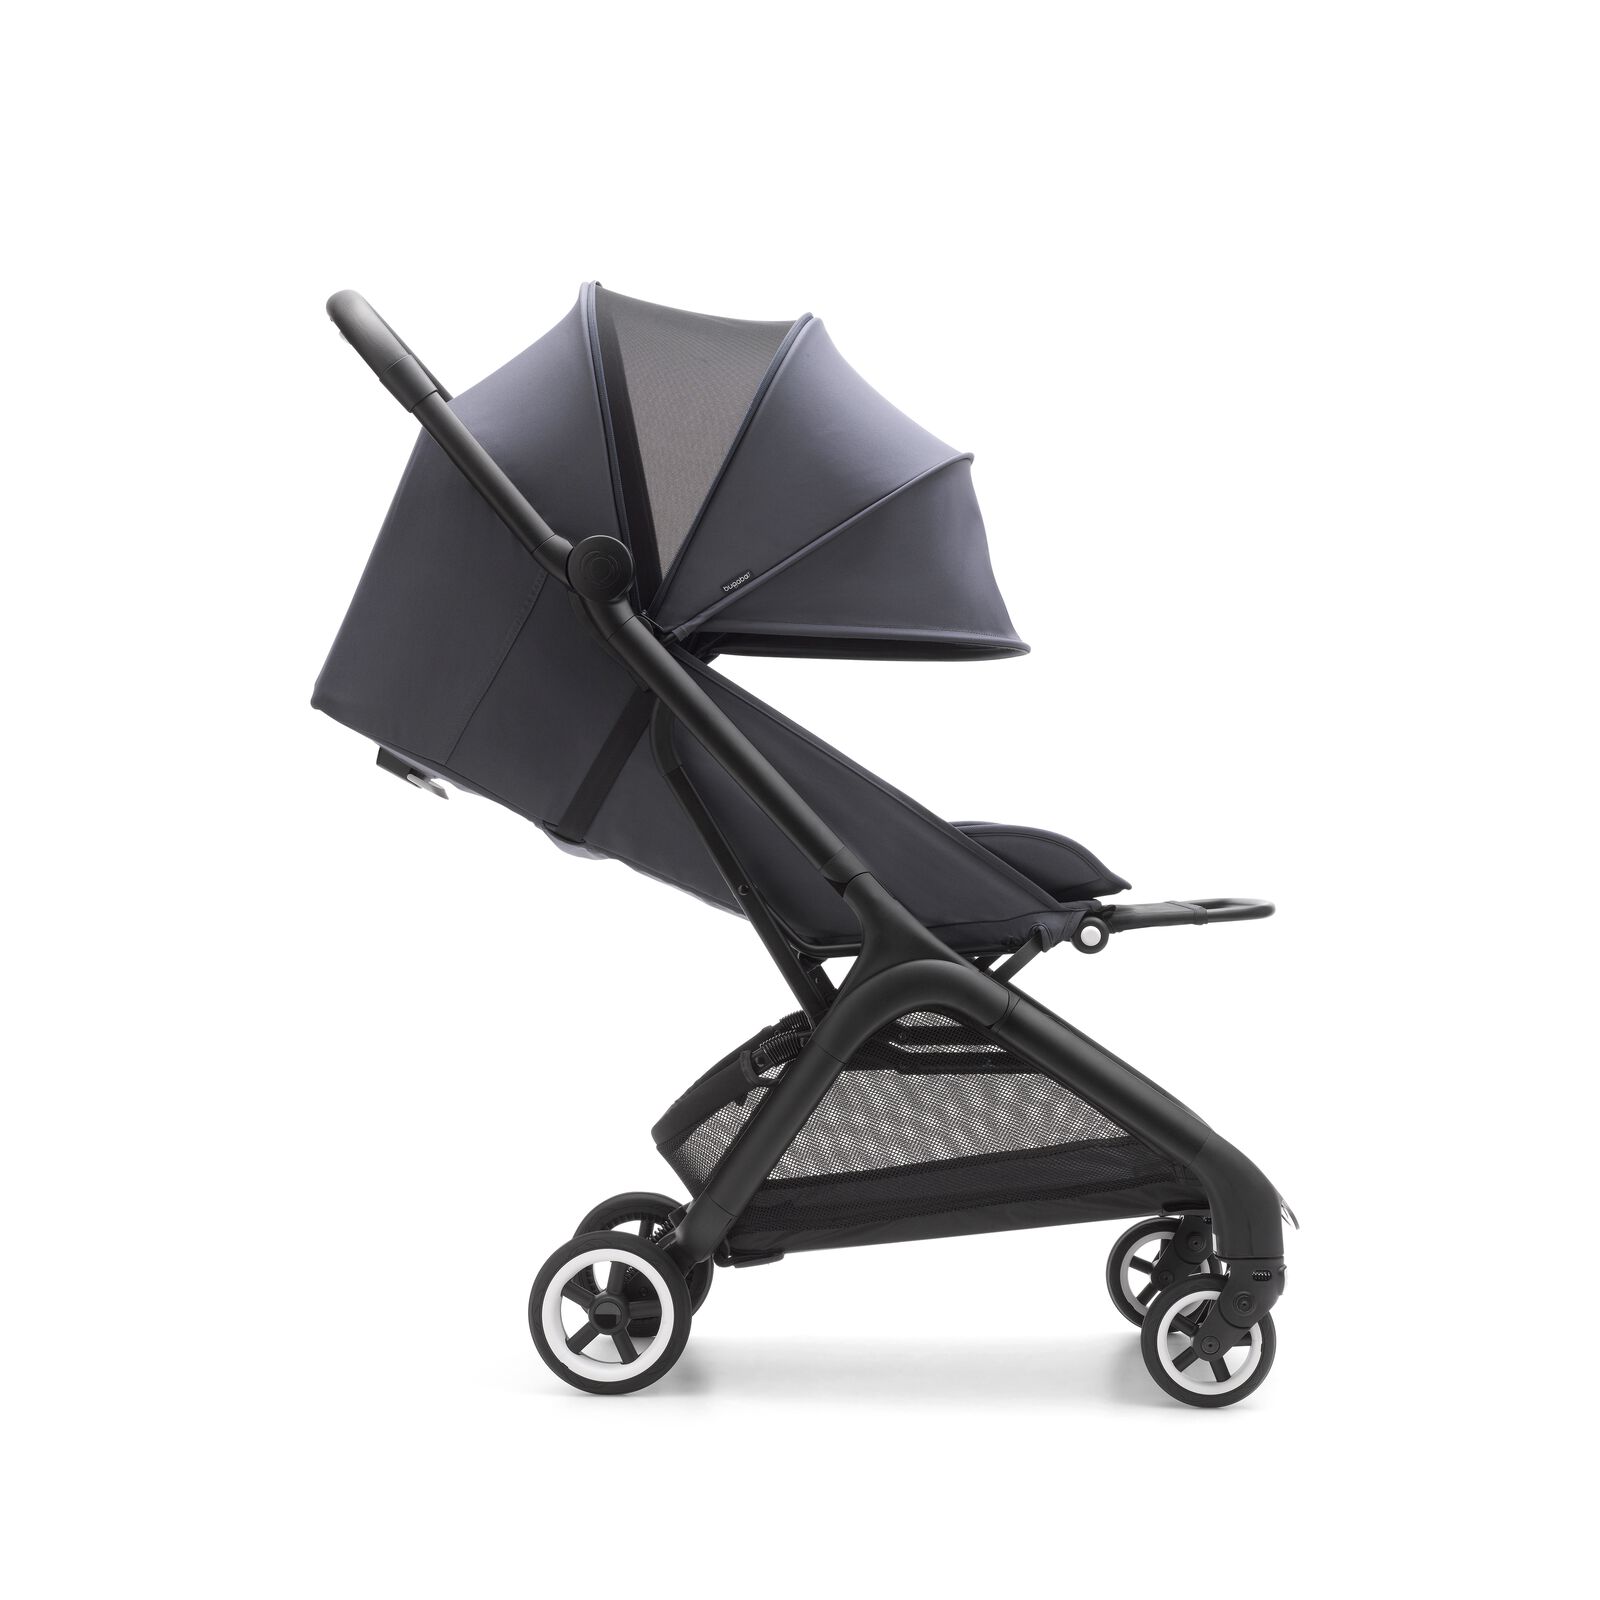 Bugaboo Butterfly seat pram - View 15